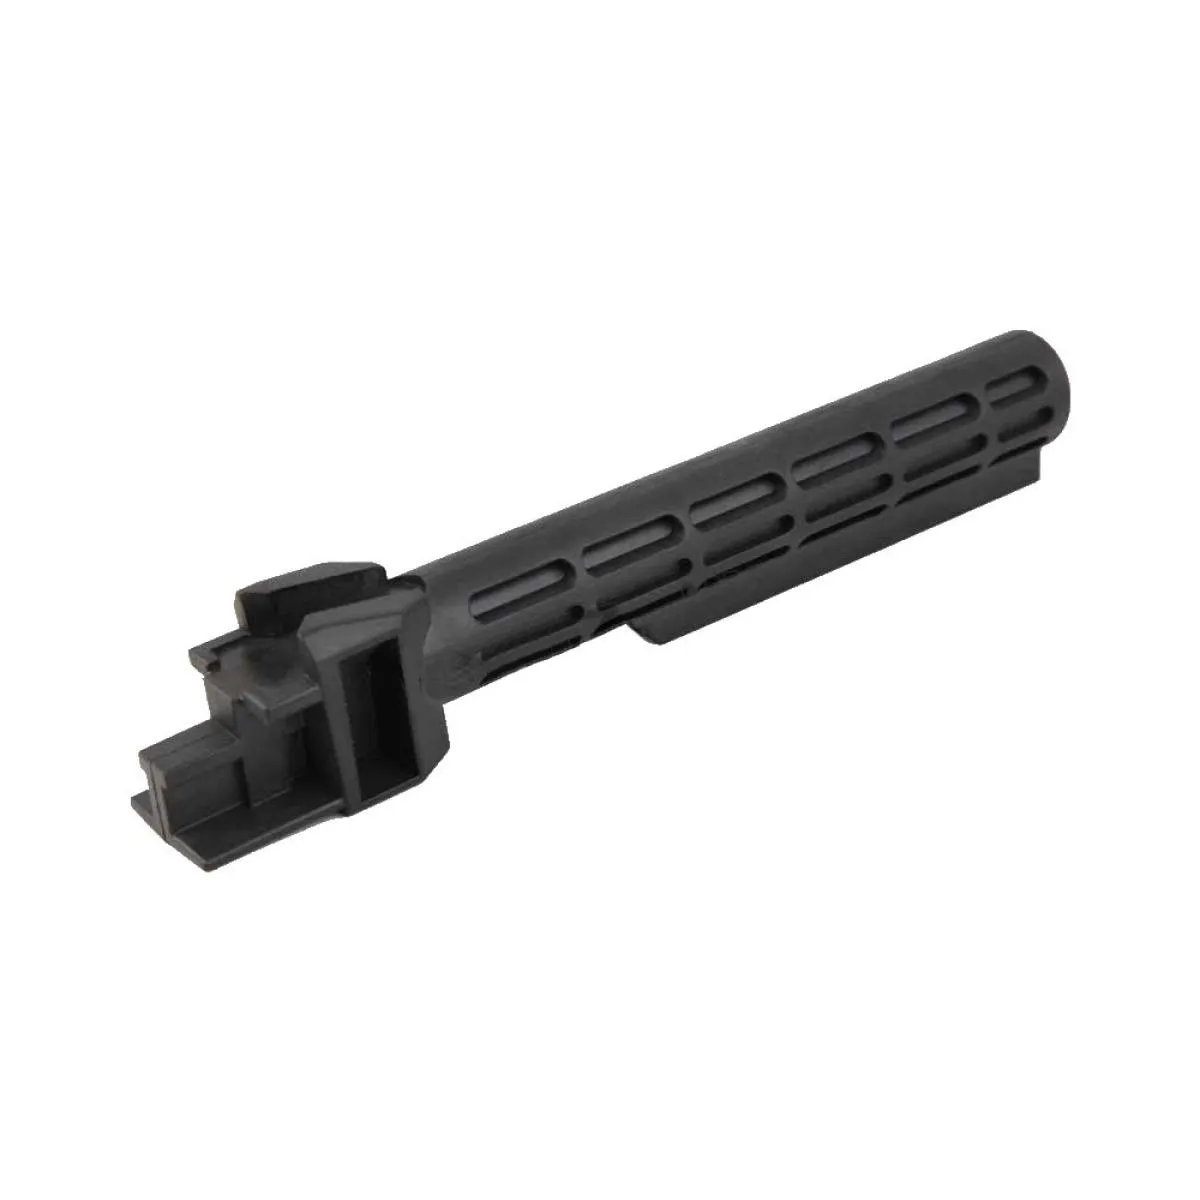 Big Dragon M4 Polymer Stock Adapter for AK74 Serie